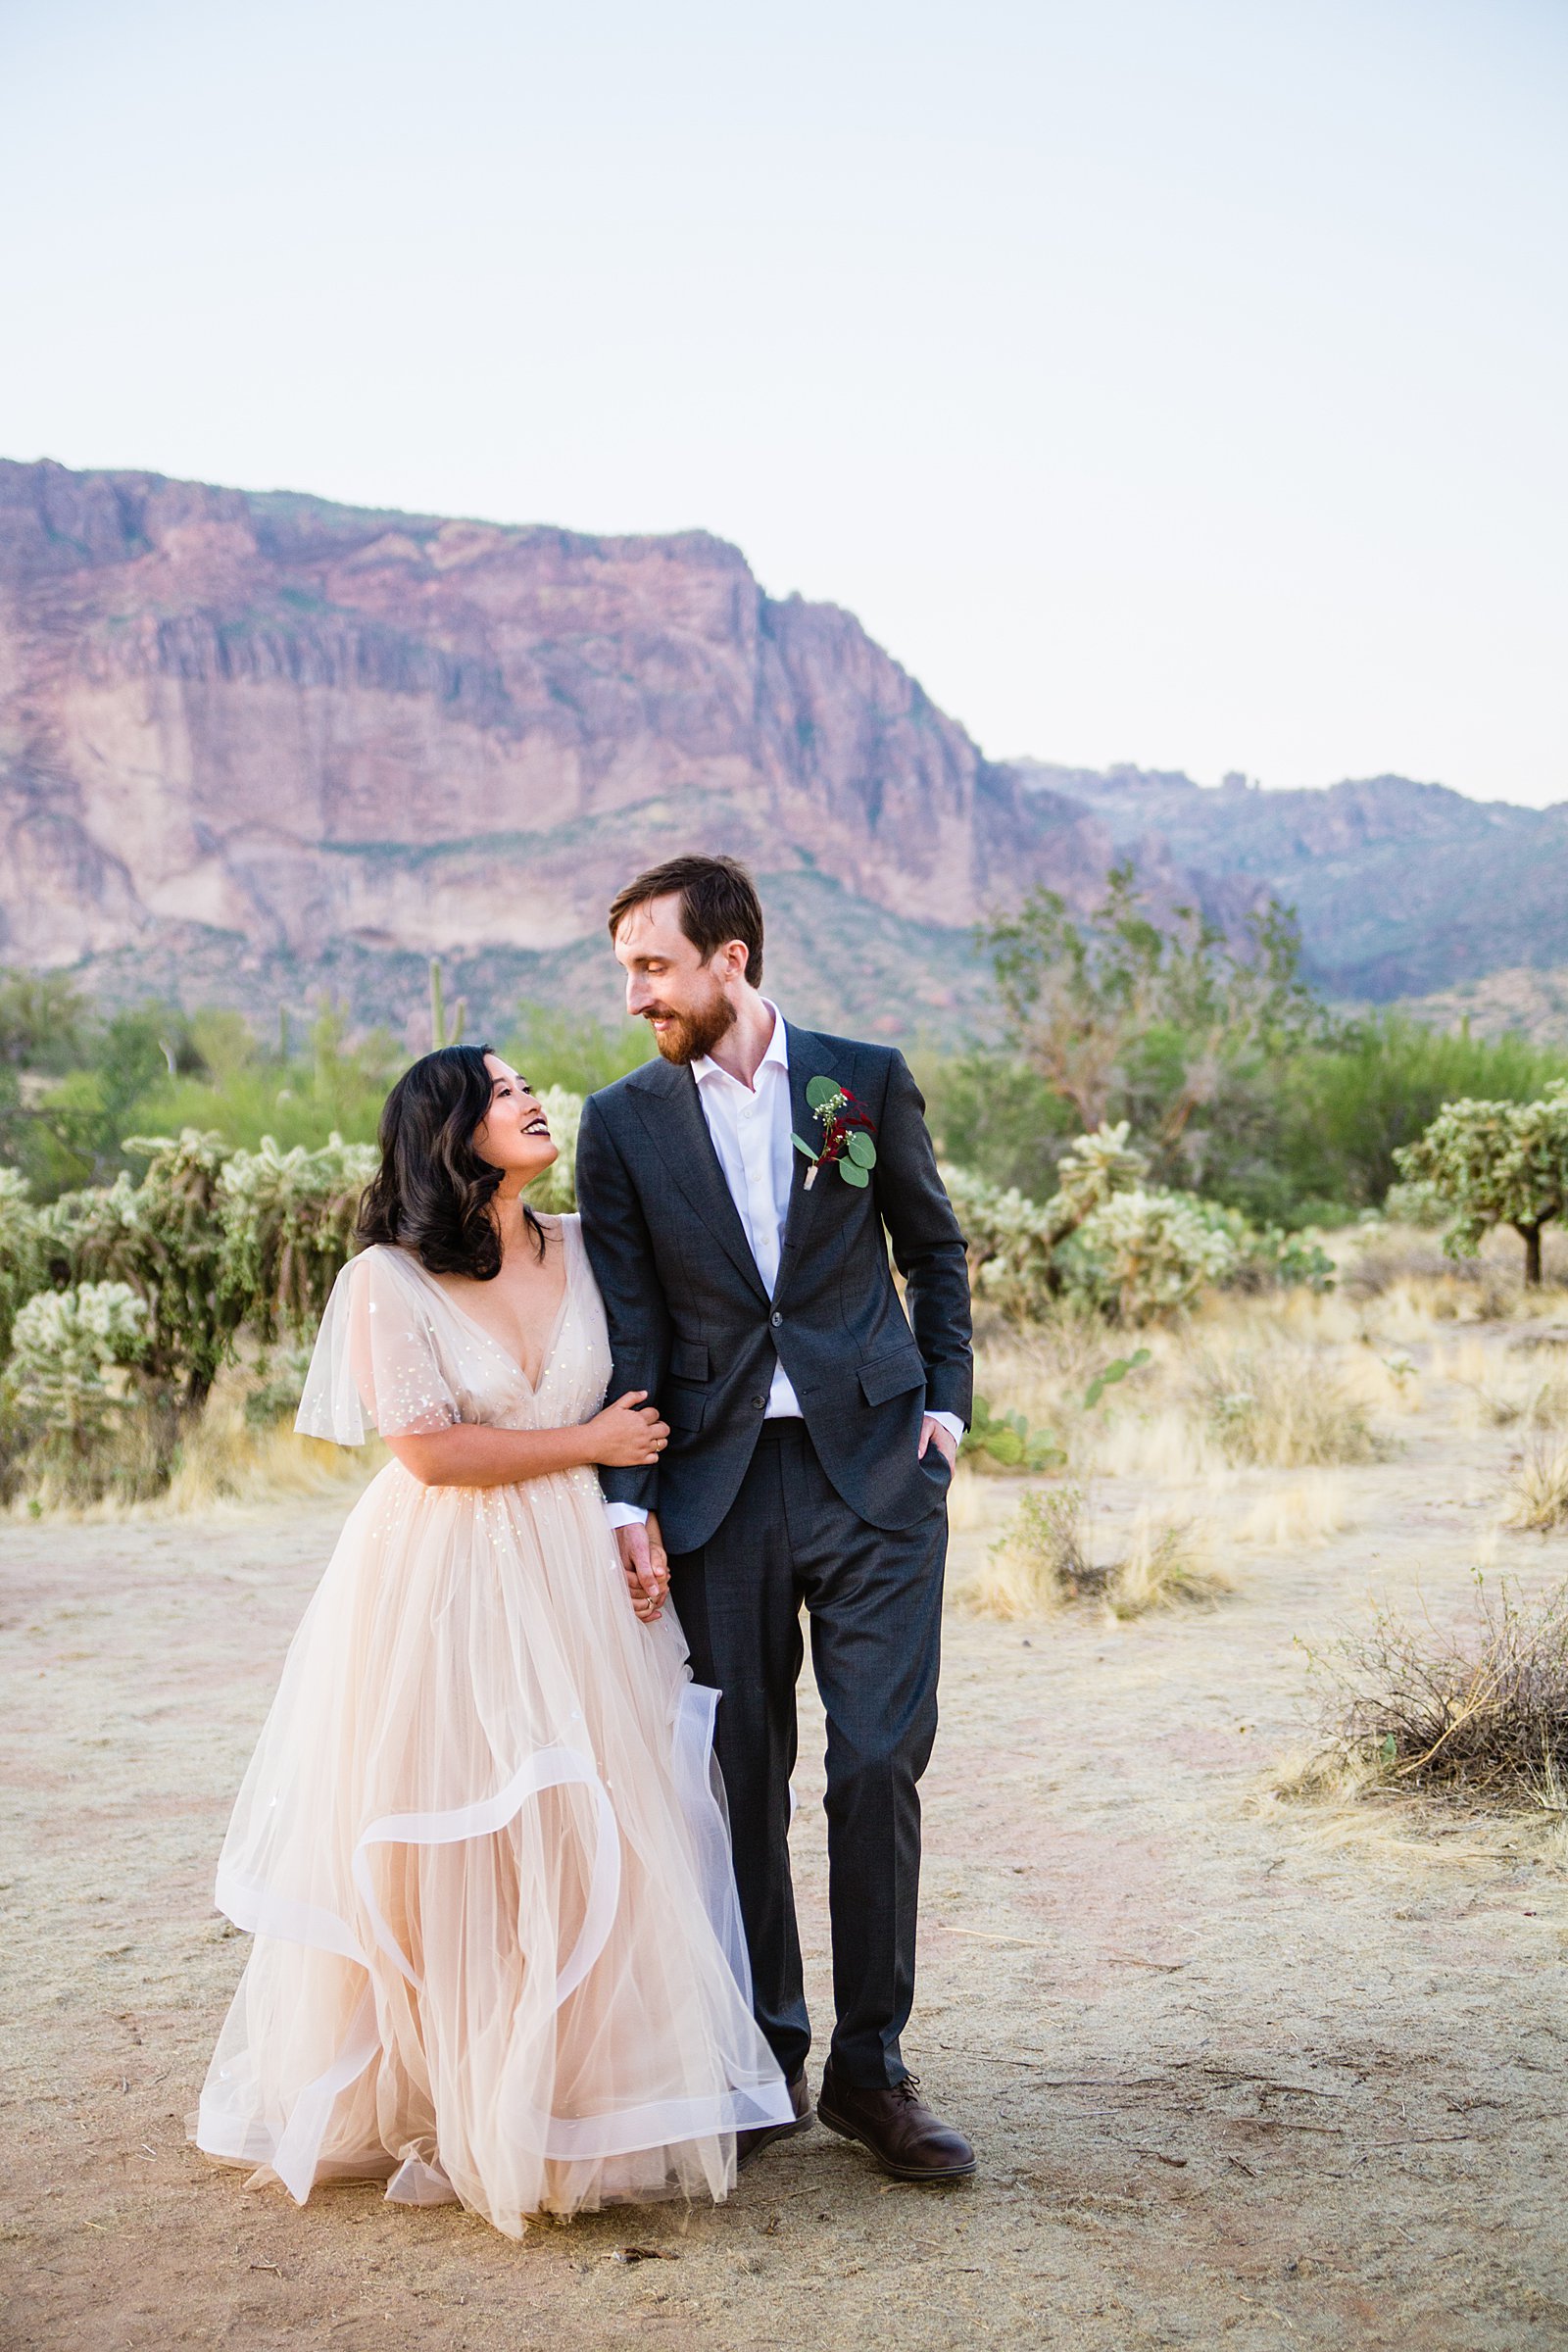 Bride and Groom walking together during their Superstition Mountain Cloth and Flame wedding by Mesa wedding photographer PMA Photography.